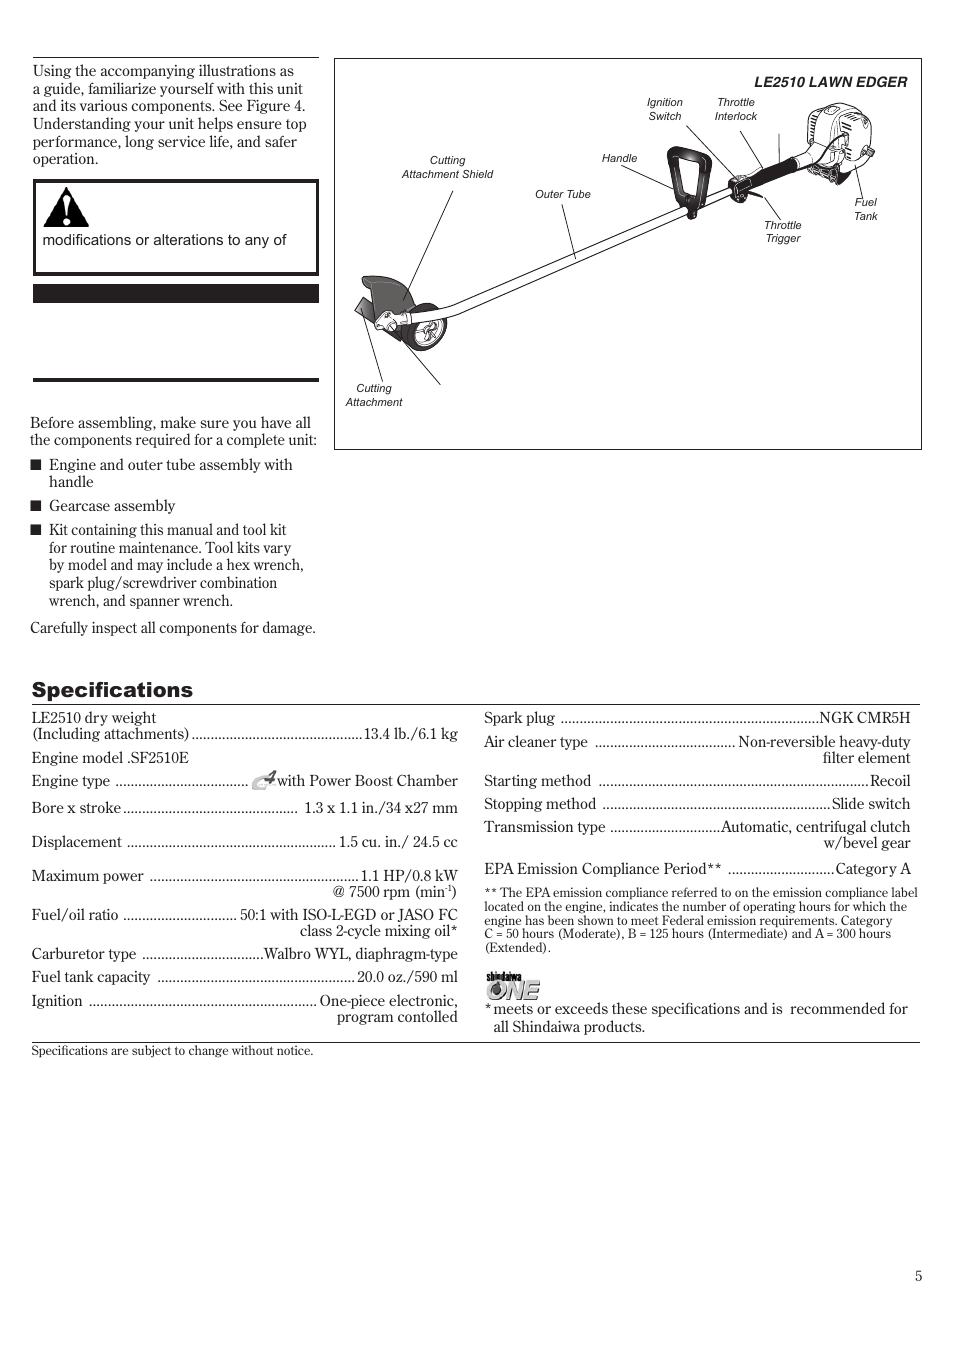 Product description, Specifications | Shindaiwa 81719 User Manual | Page 5 / 36